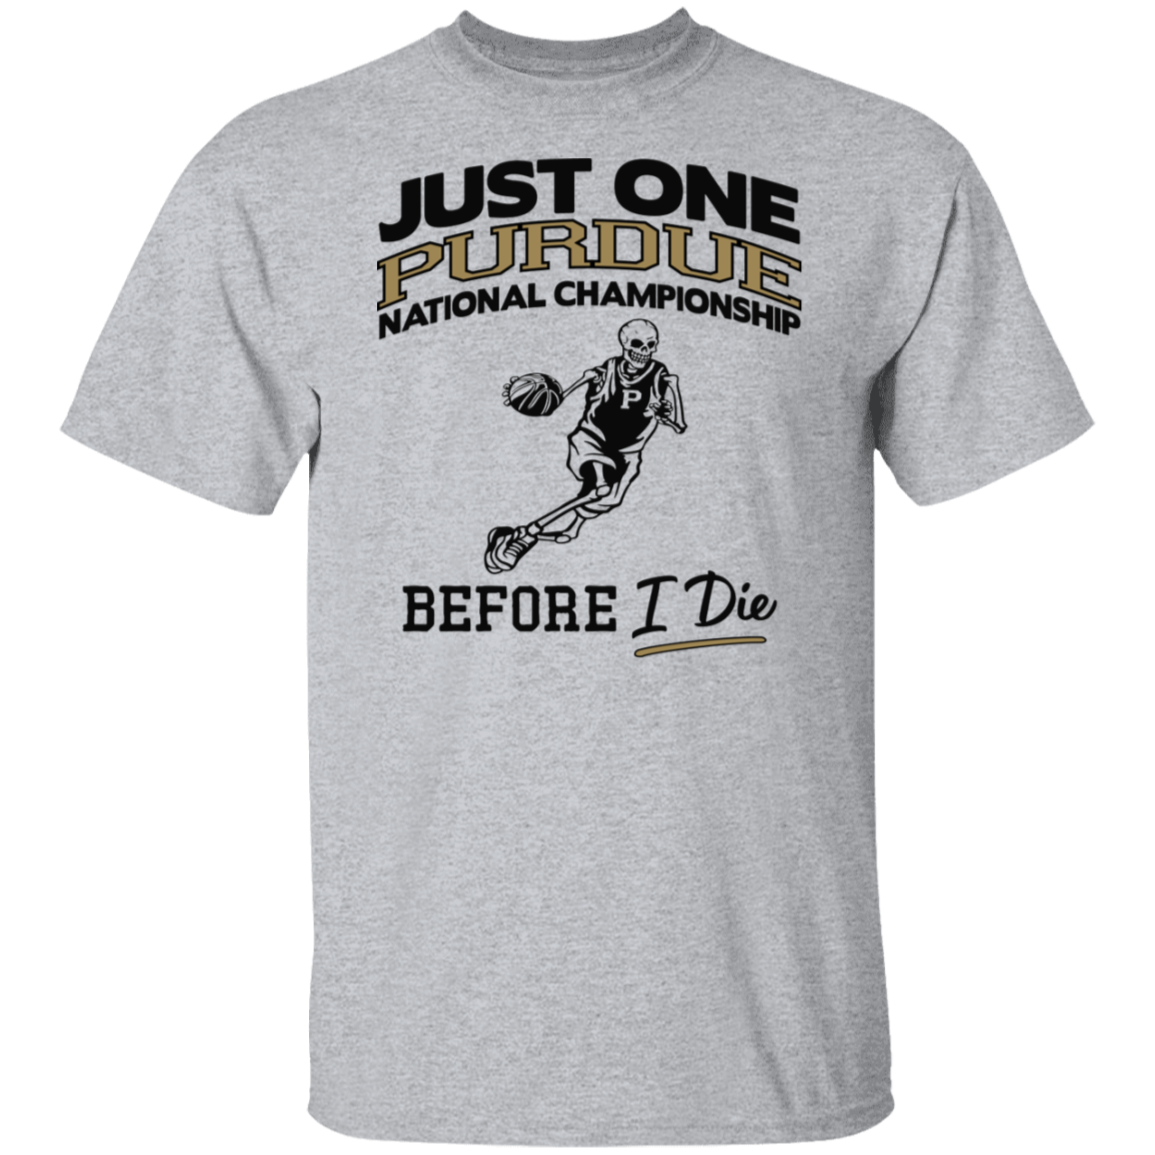 Just One Purdue National Championship T-Shirt